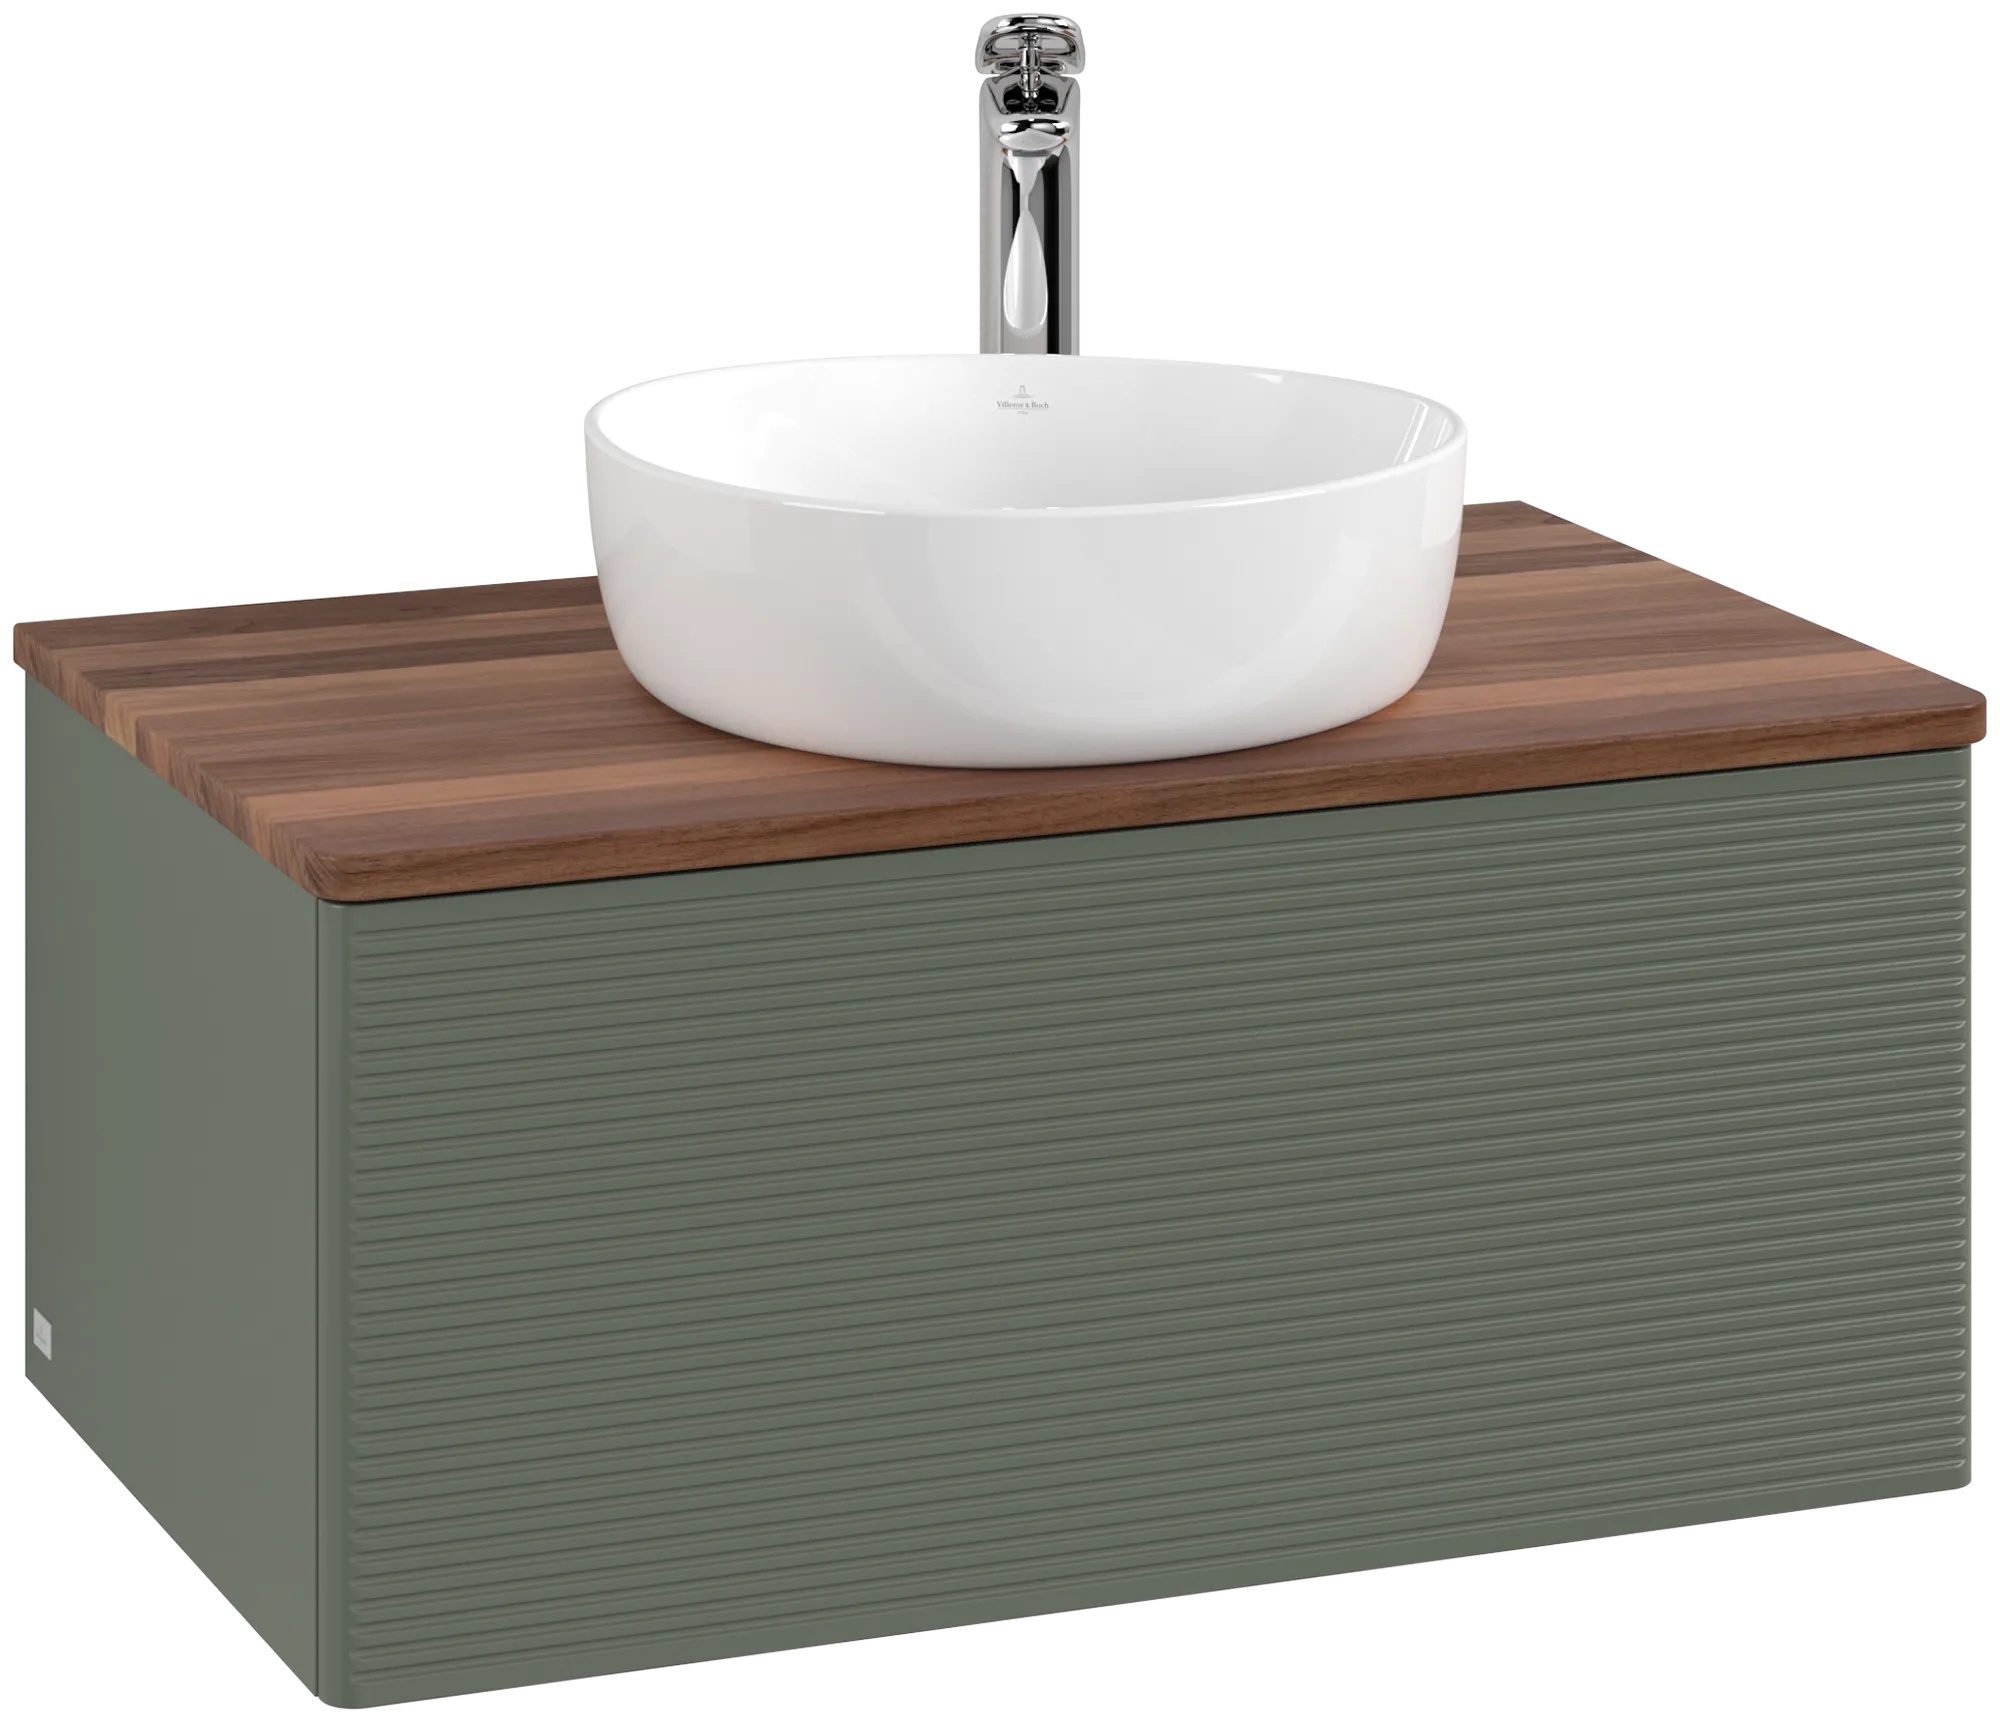 Obrázek VILLEROY BOCH Antao Vanity unit, with lighting, 1 pull-out compartment, 800 x 360 x 500 mm, Front with grain texture, Leaf Green Matt Lacquer / Warm Walnut #L30152HL